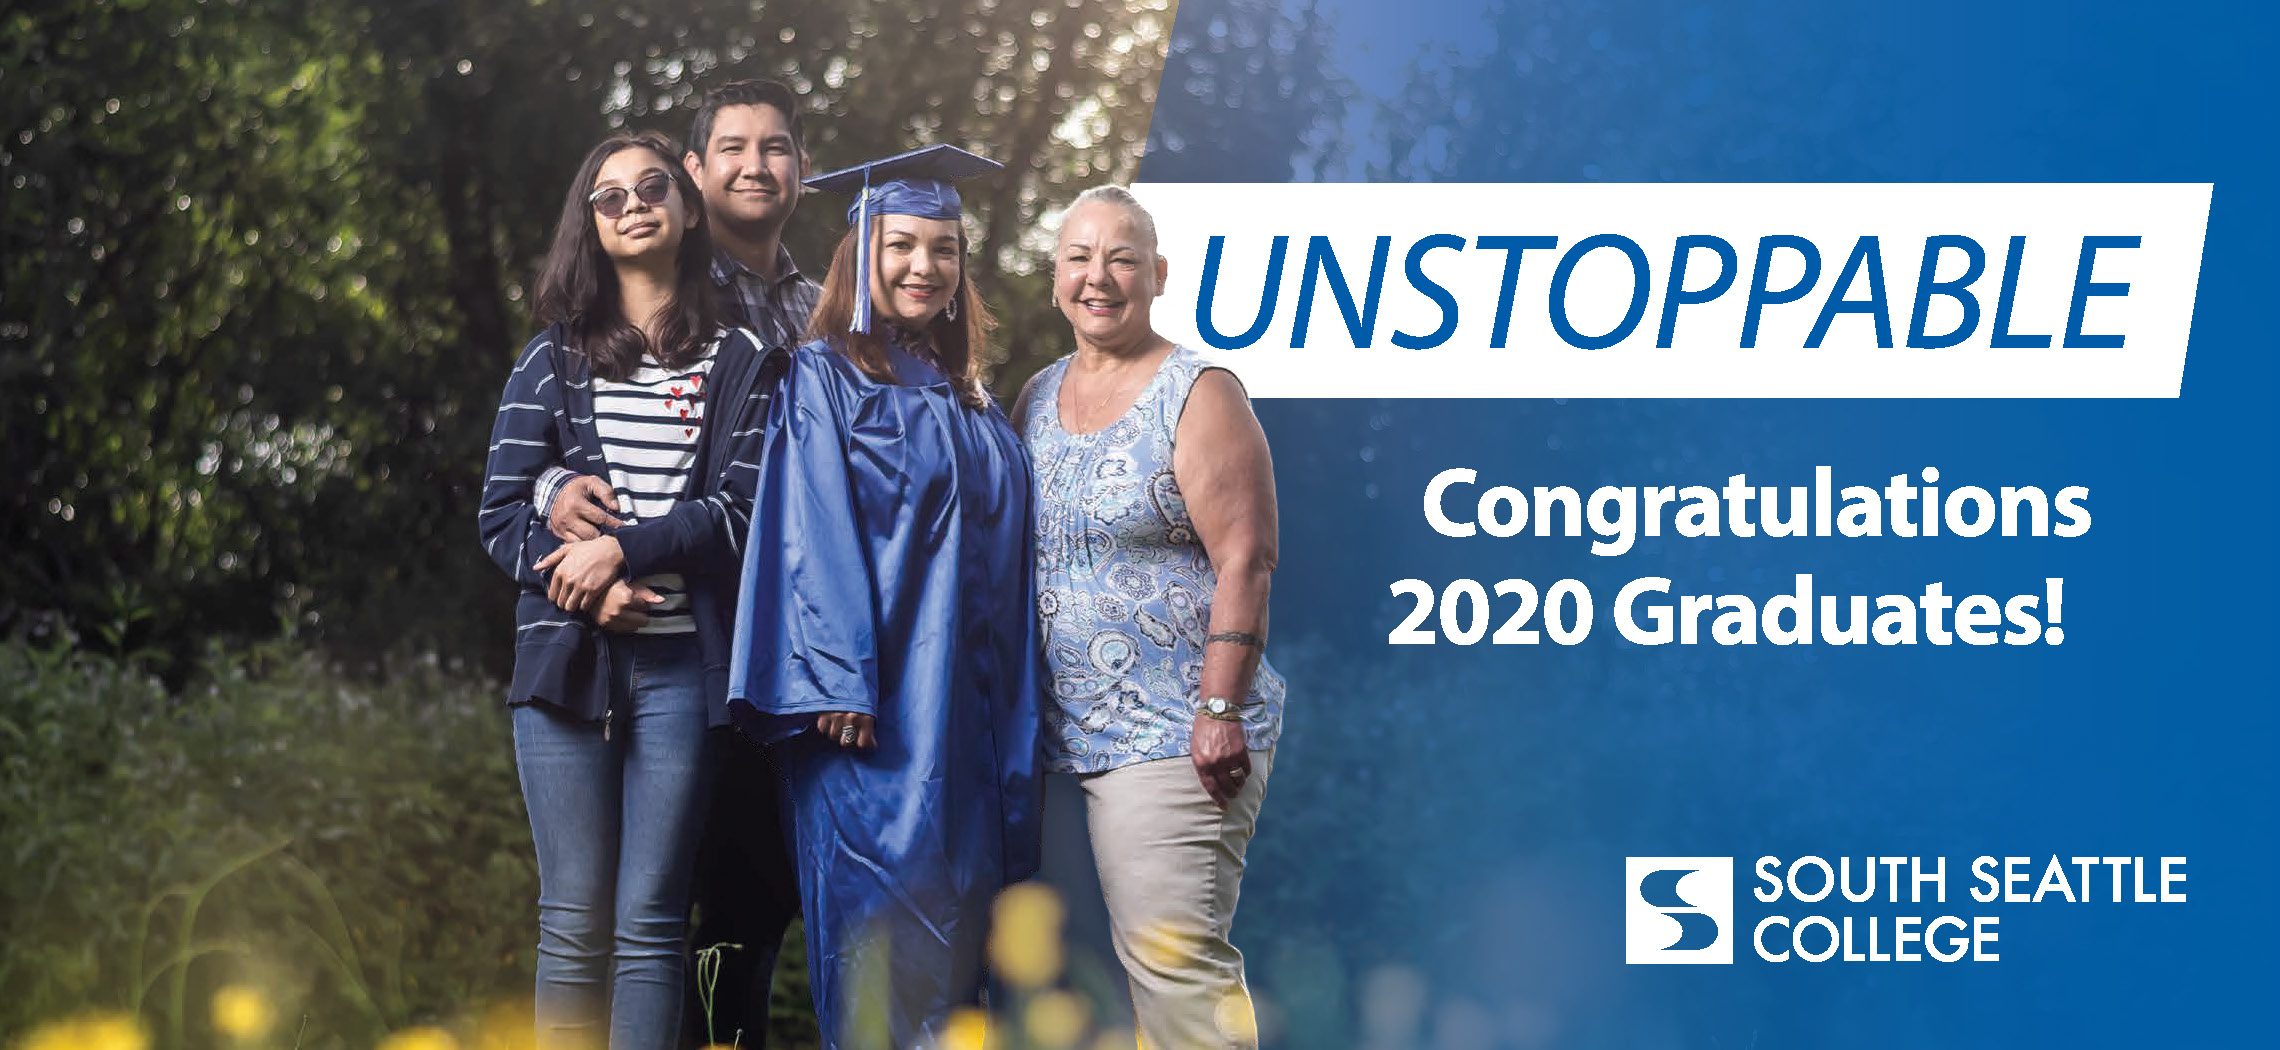 South Seattle College 2020 Graduate UNSTOPPABLE billboard grad with family